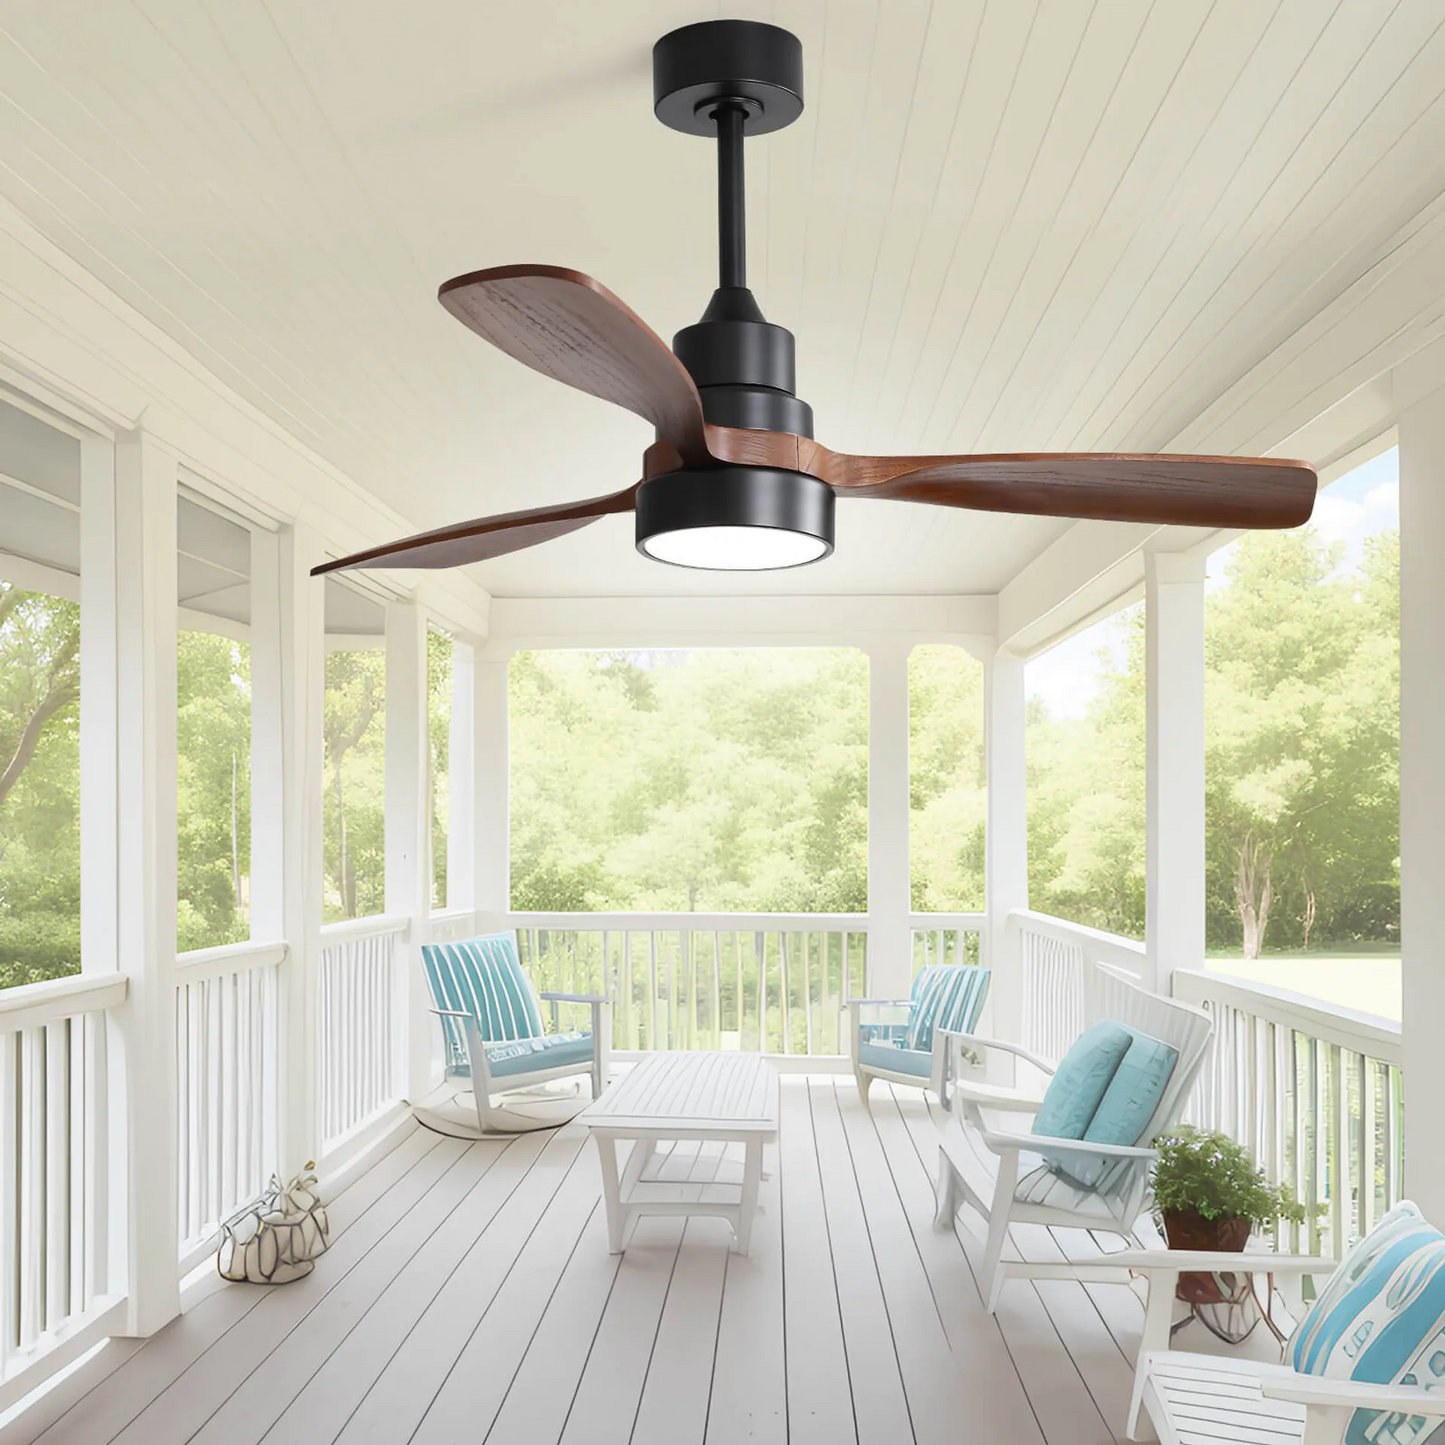 Elegant 48-Inch Ceiling Fan with Wood Blades and Remote Control